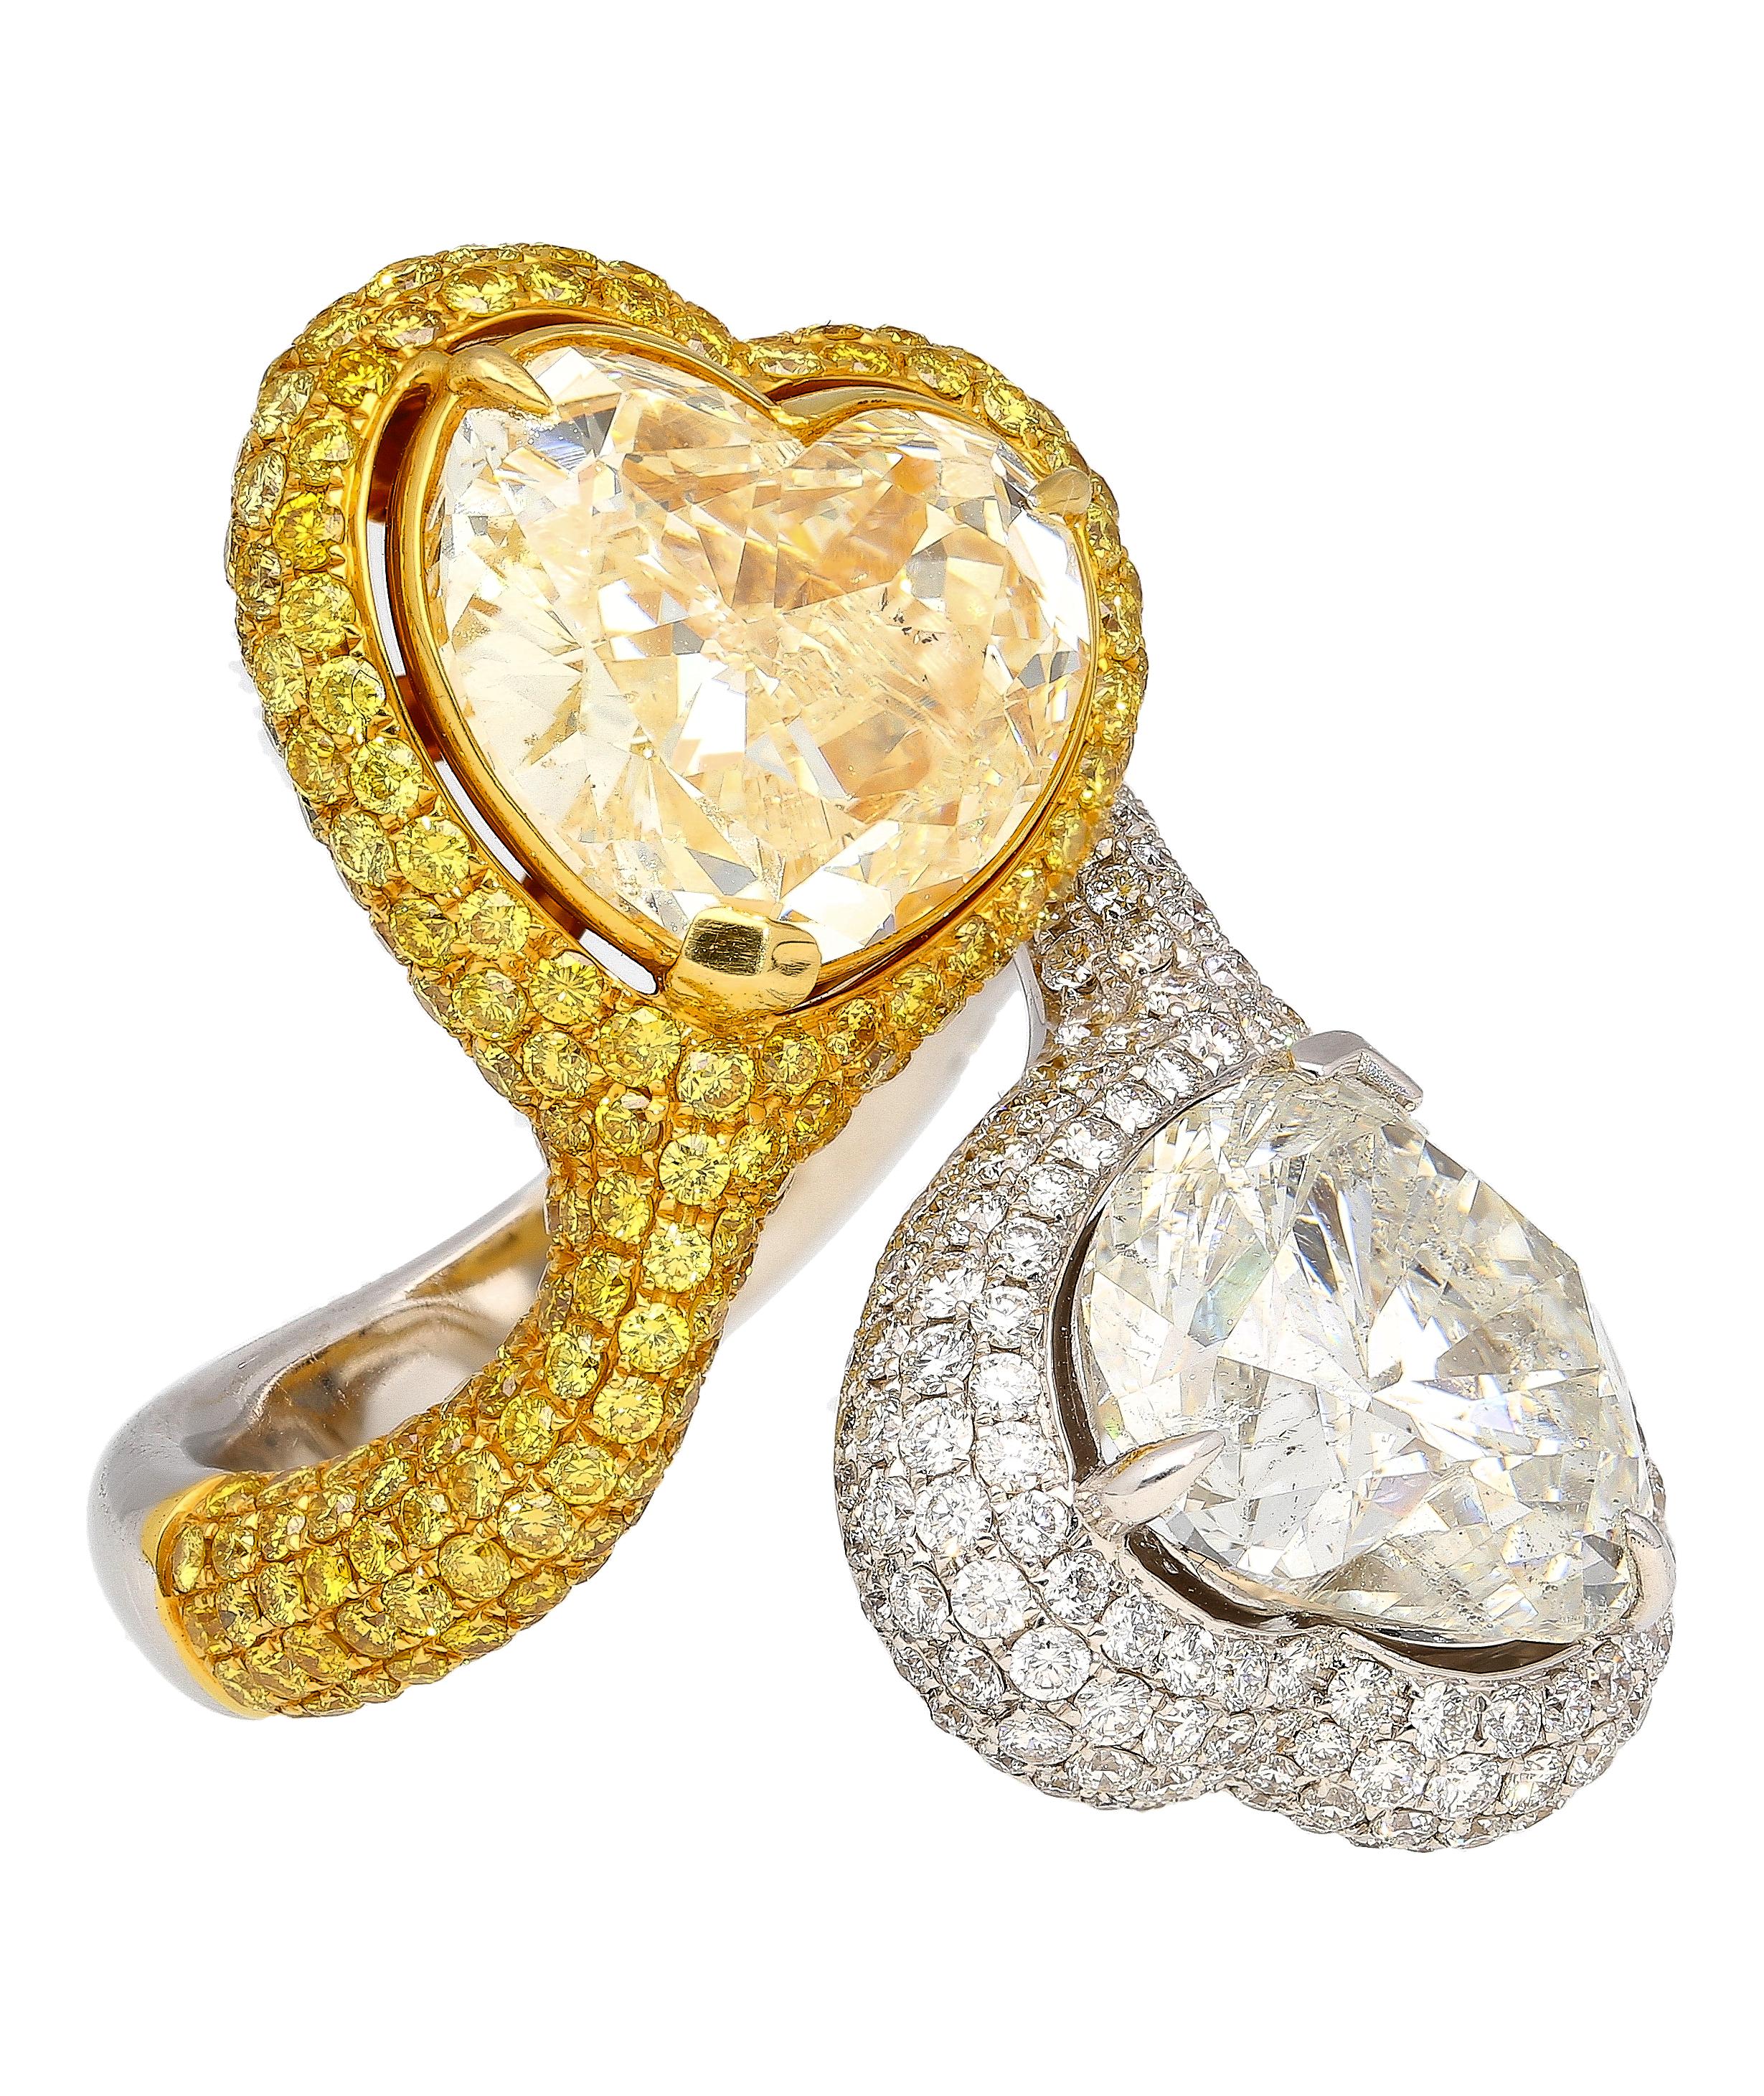 Women's Heart Cut 5.79 & 5.73 Carat Fancy Yellow and White Diamond Toi Et Moi Ring For Sale